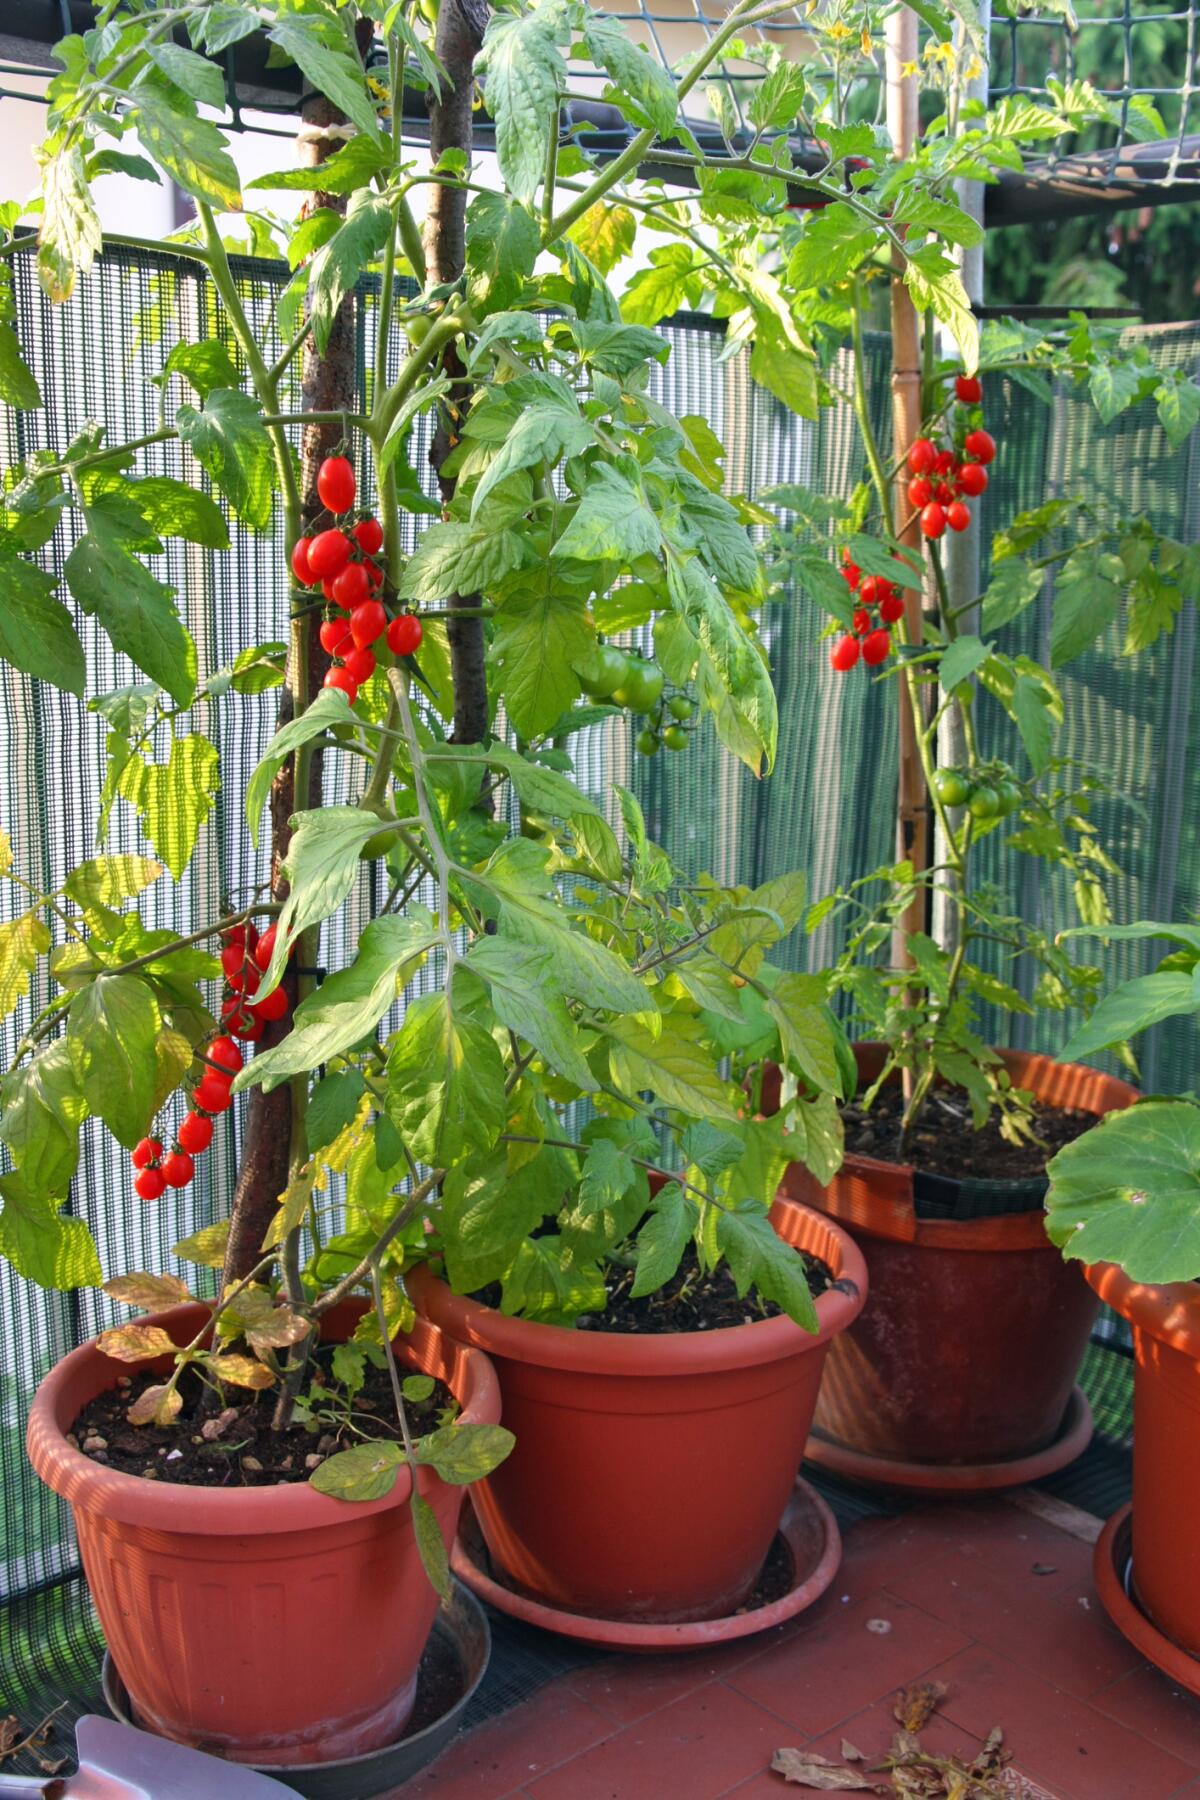 Cherry tomatoes growing in pots on a balcony.